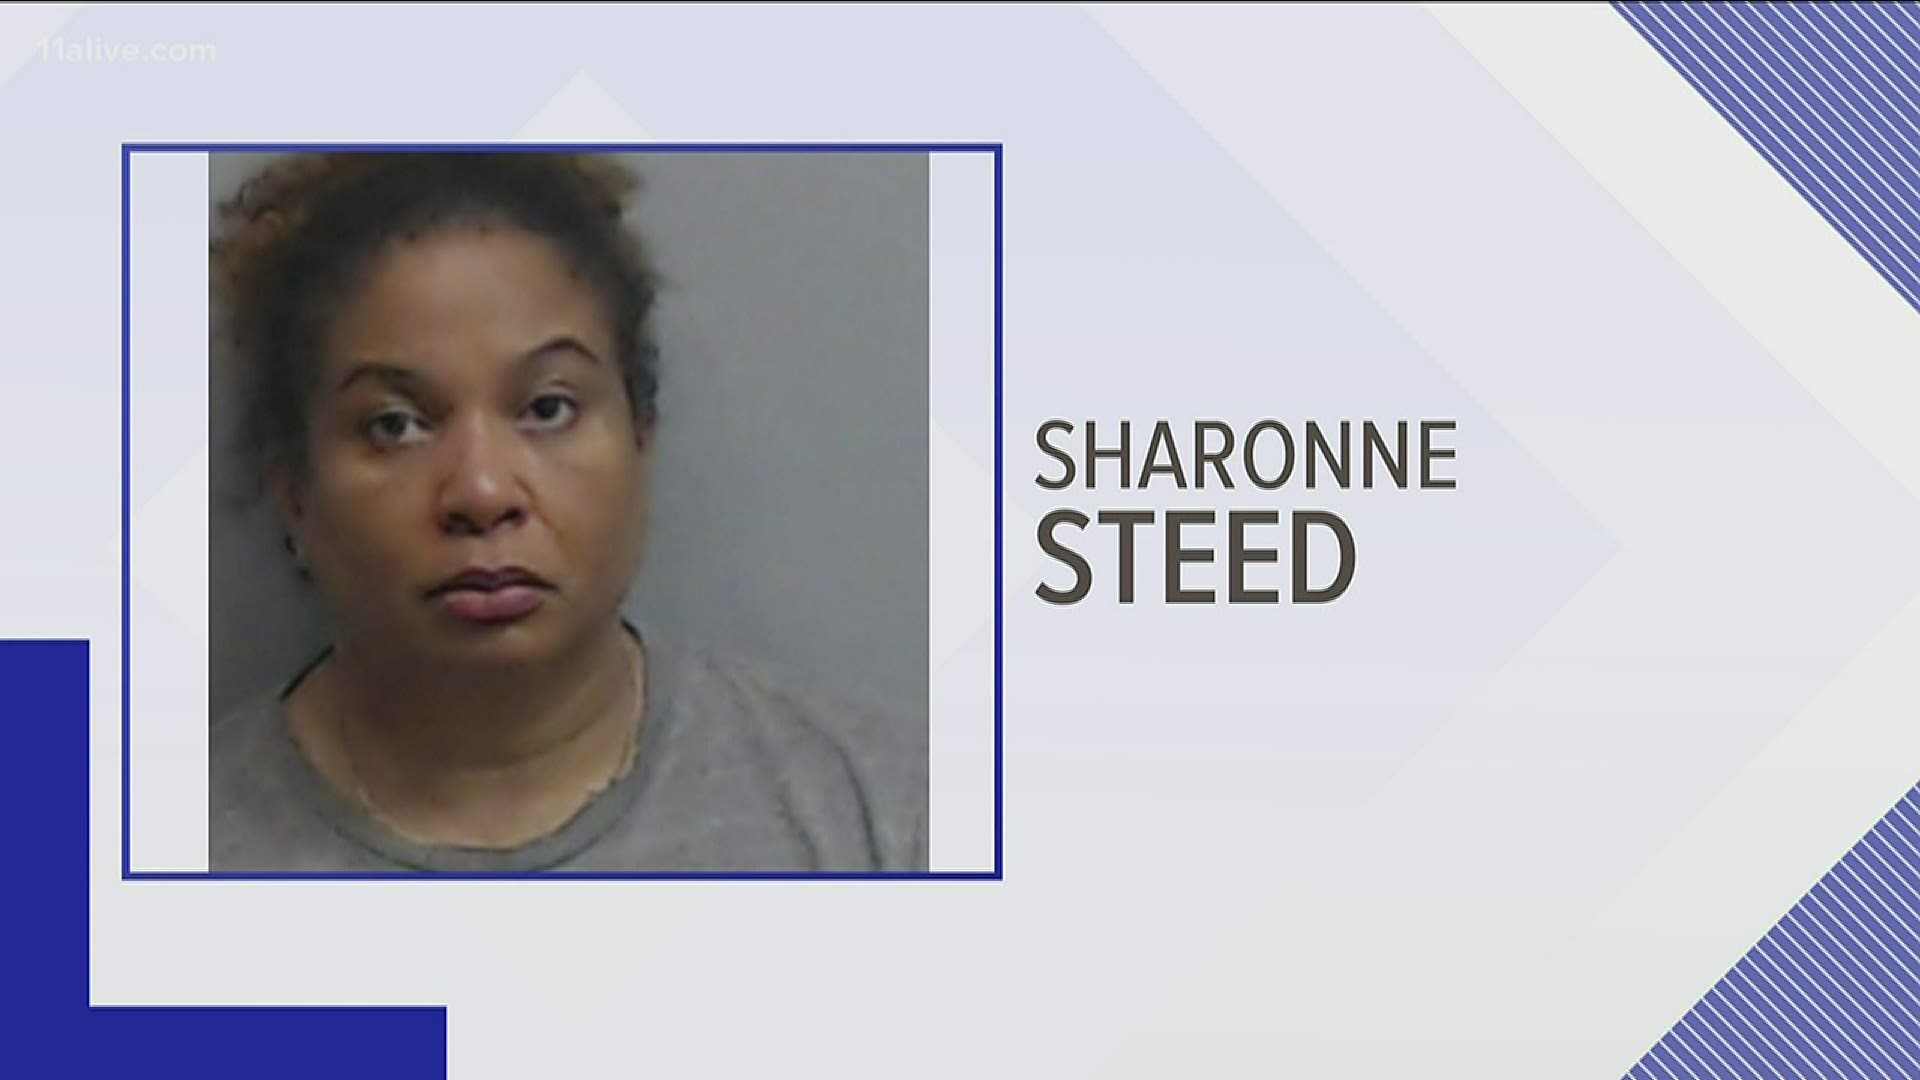 She turned herself over to authorities on April 14, and has been transported to the Fulton County Jail.